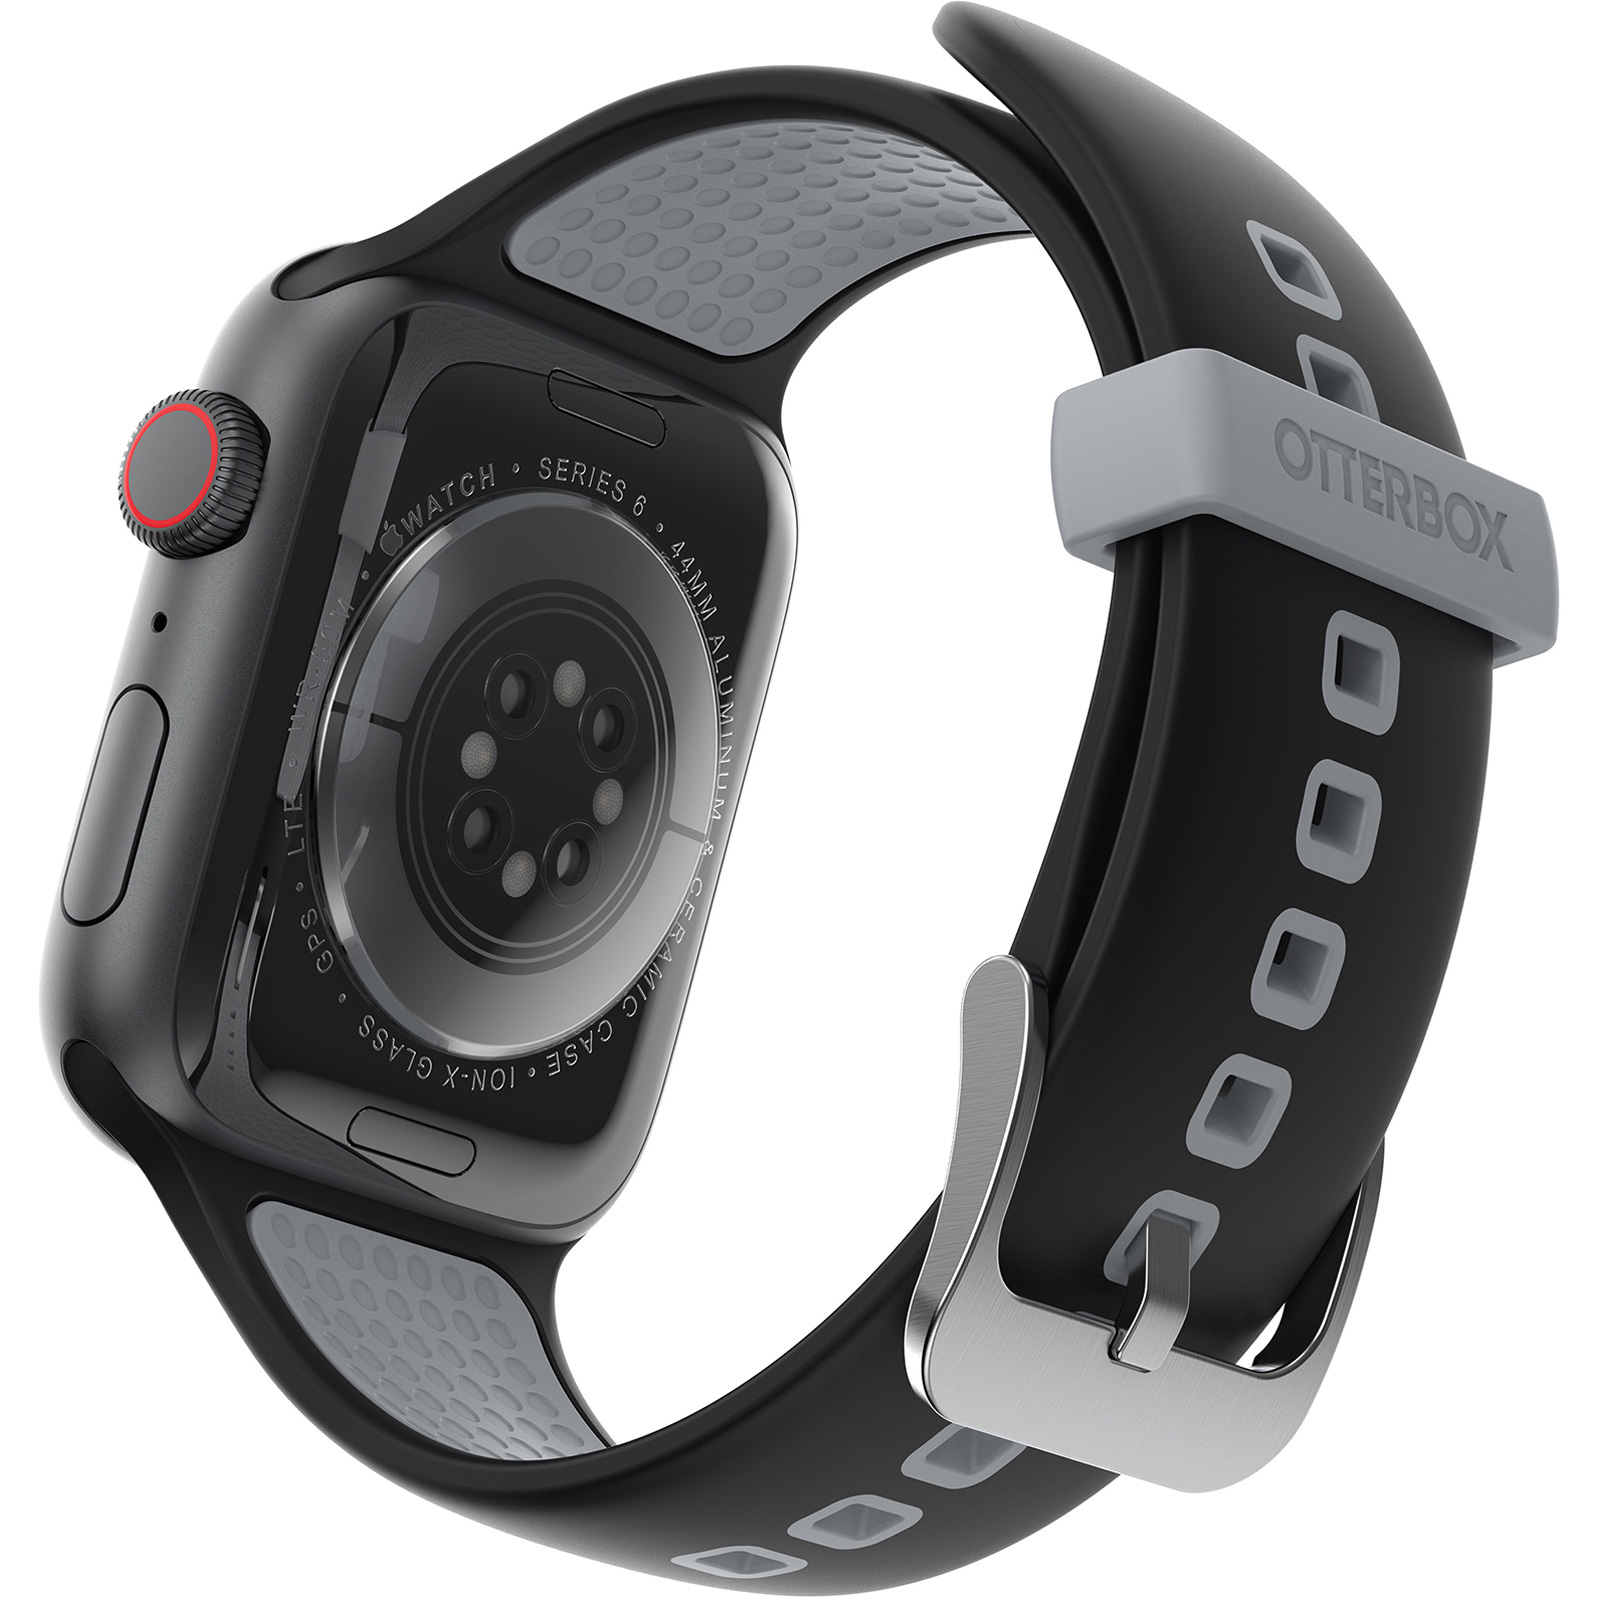 Apple Watch Wrist Band | Comfortable, Durable OtterBox Band